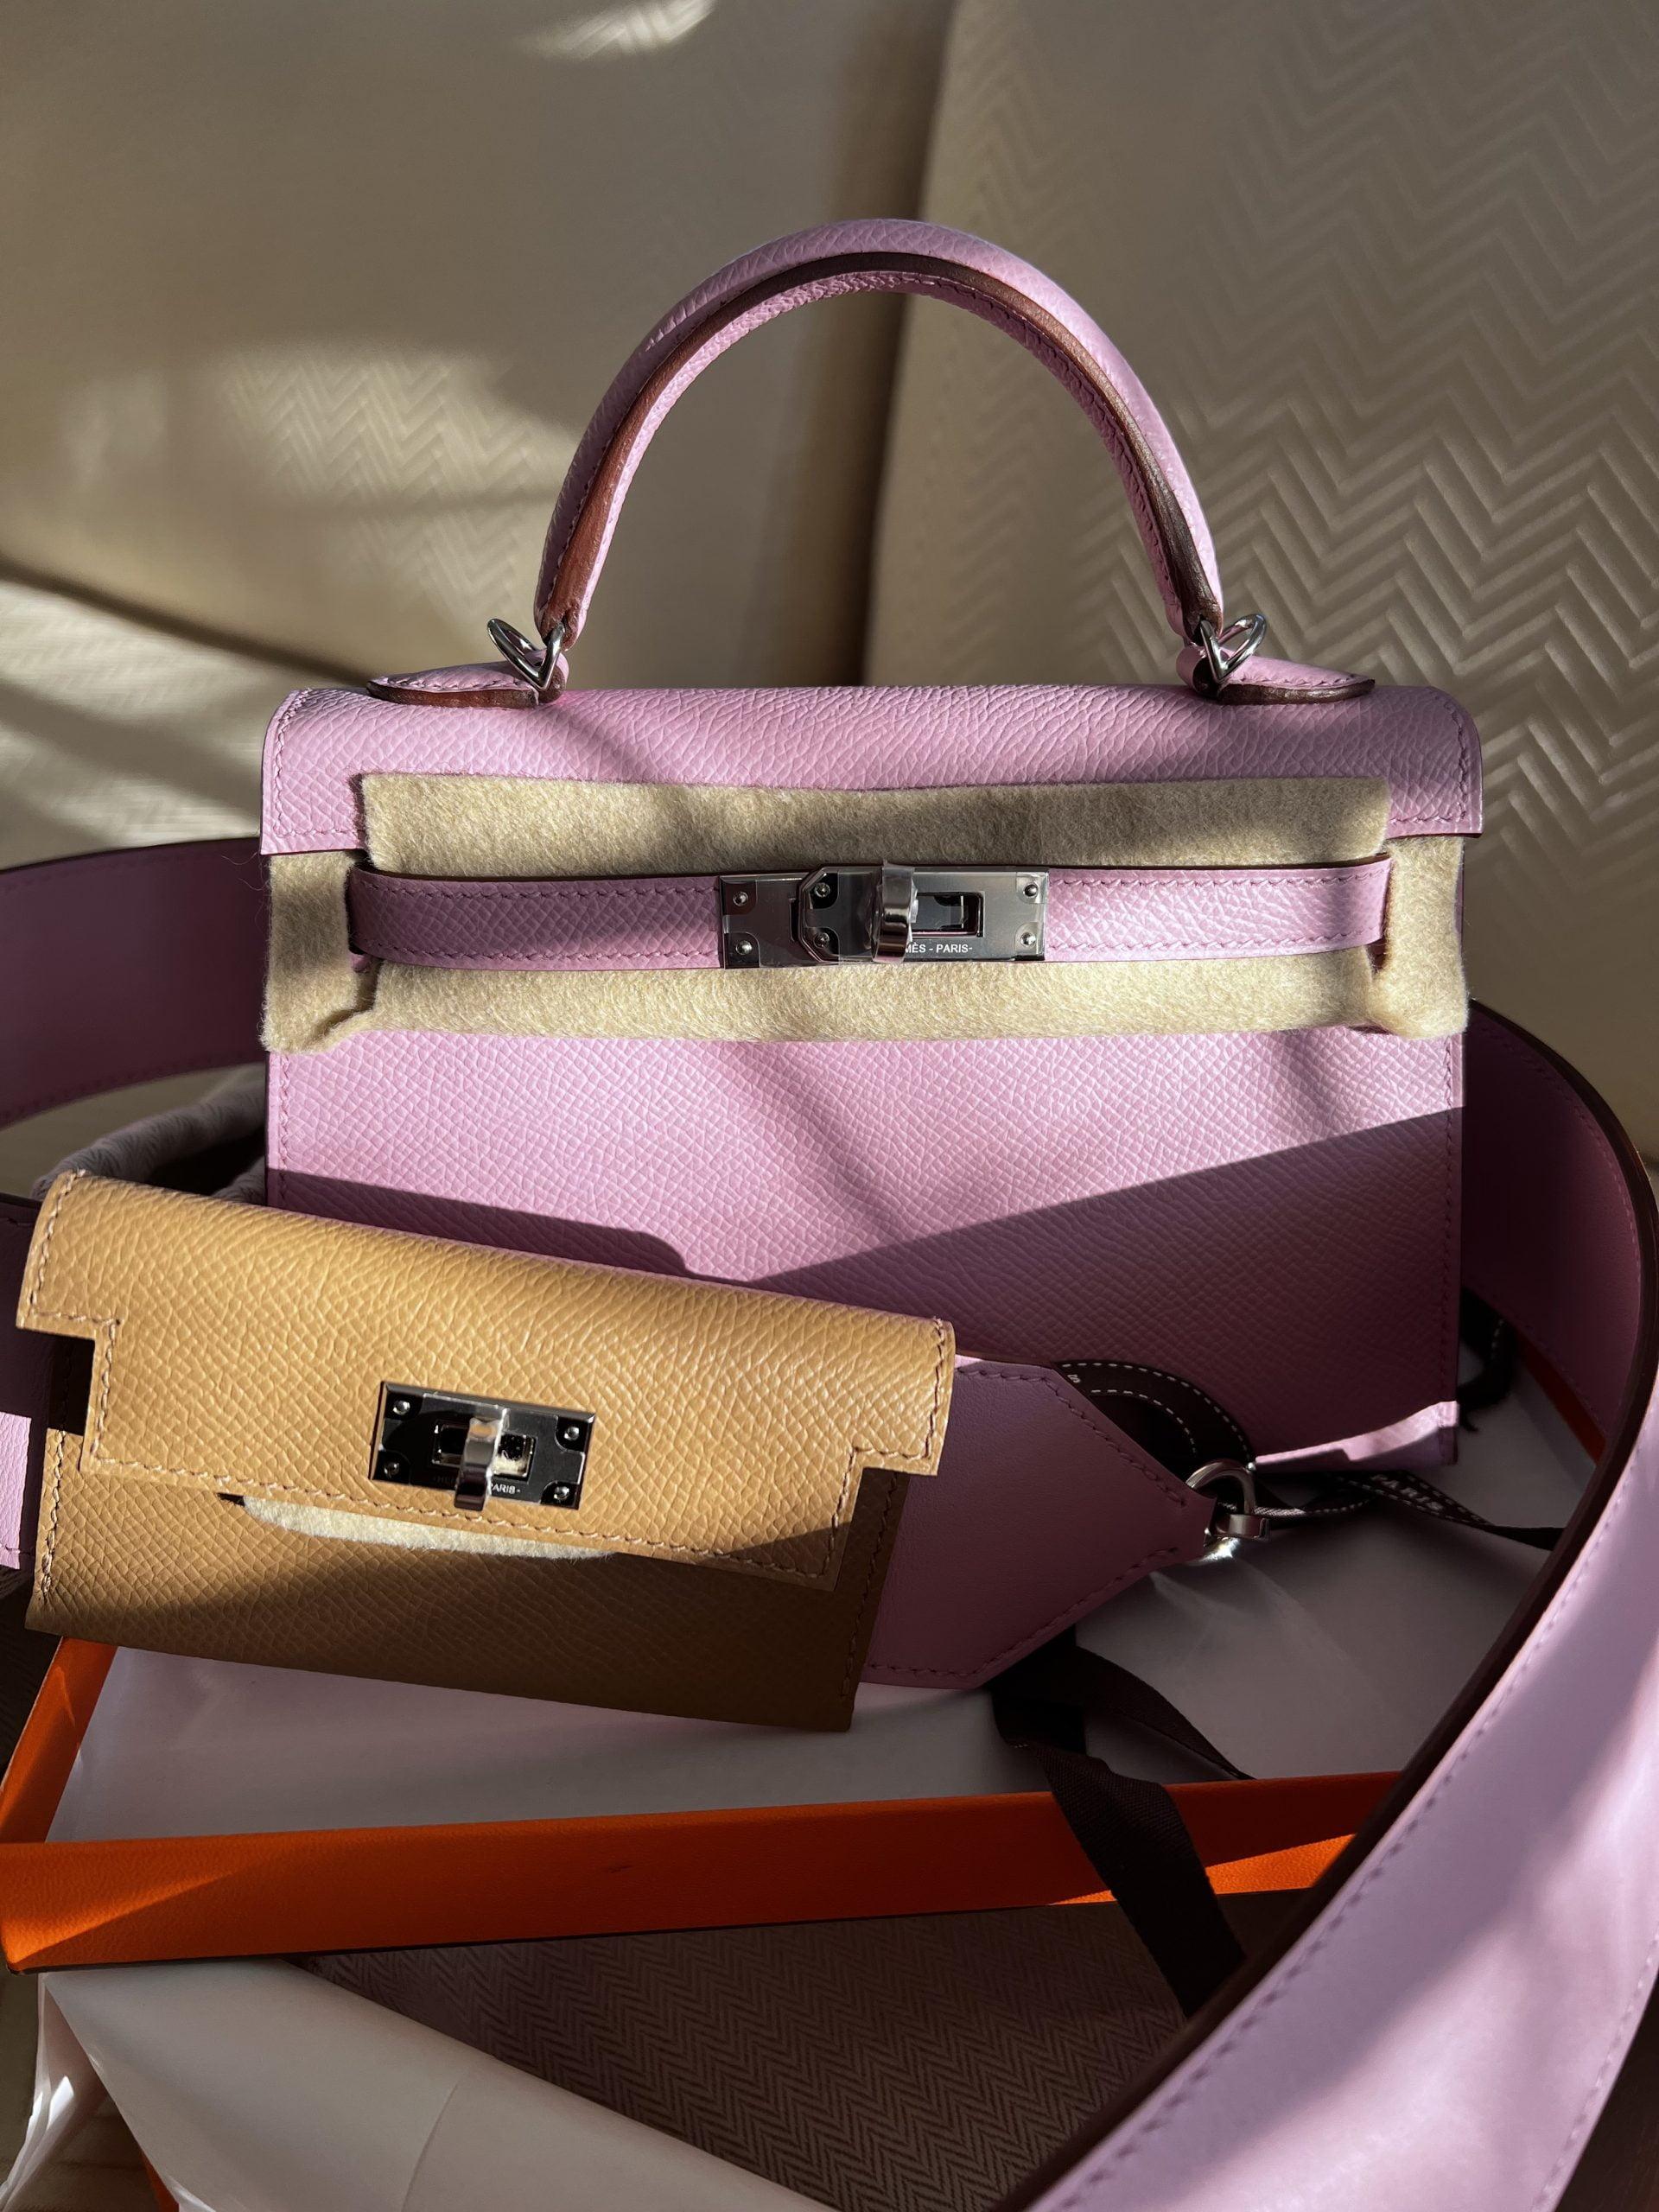 Hermes Launches The Ultimate 3 In 1 Handbag Boasting Compartments For Your  Phone, Airpods And Lipstick!